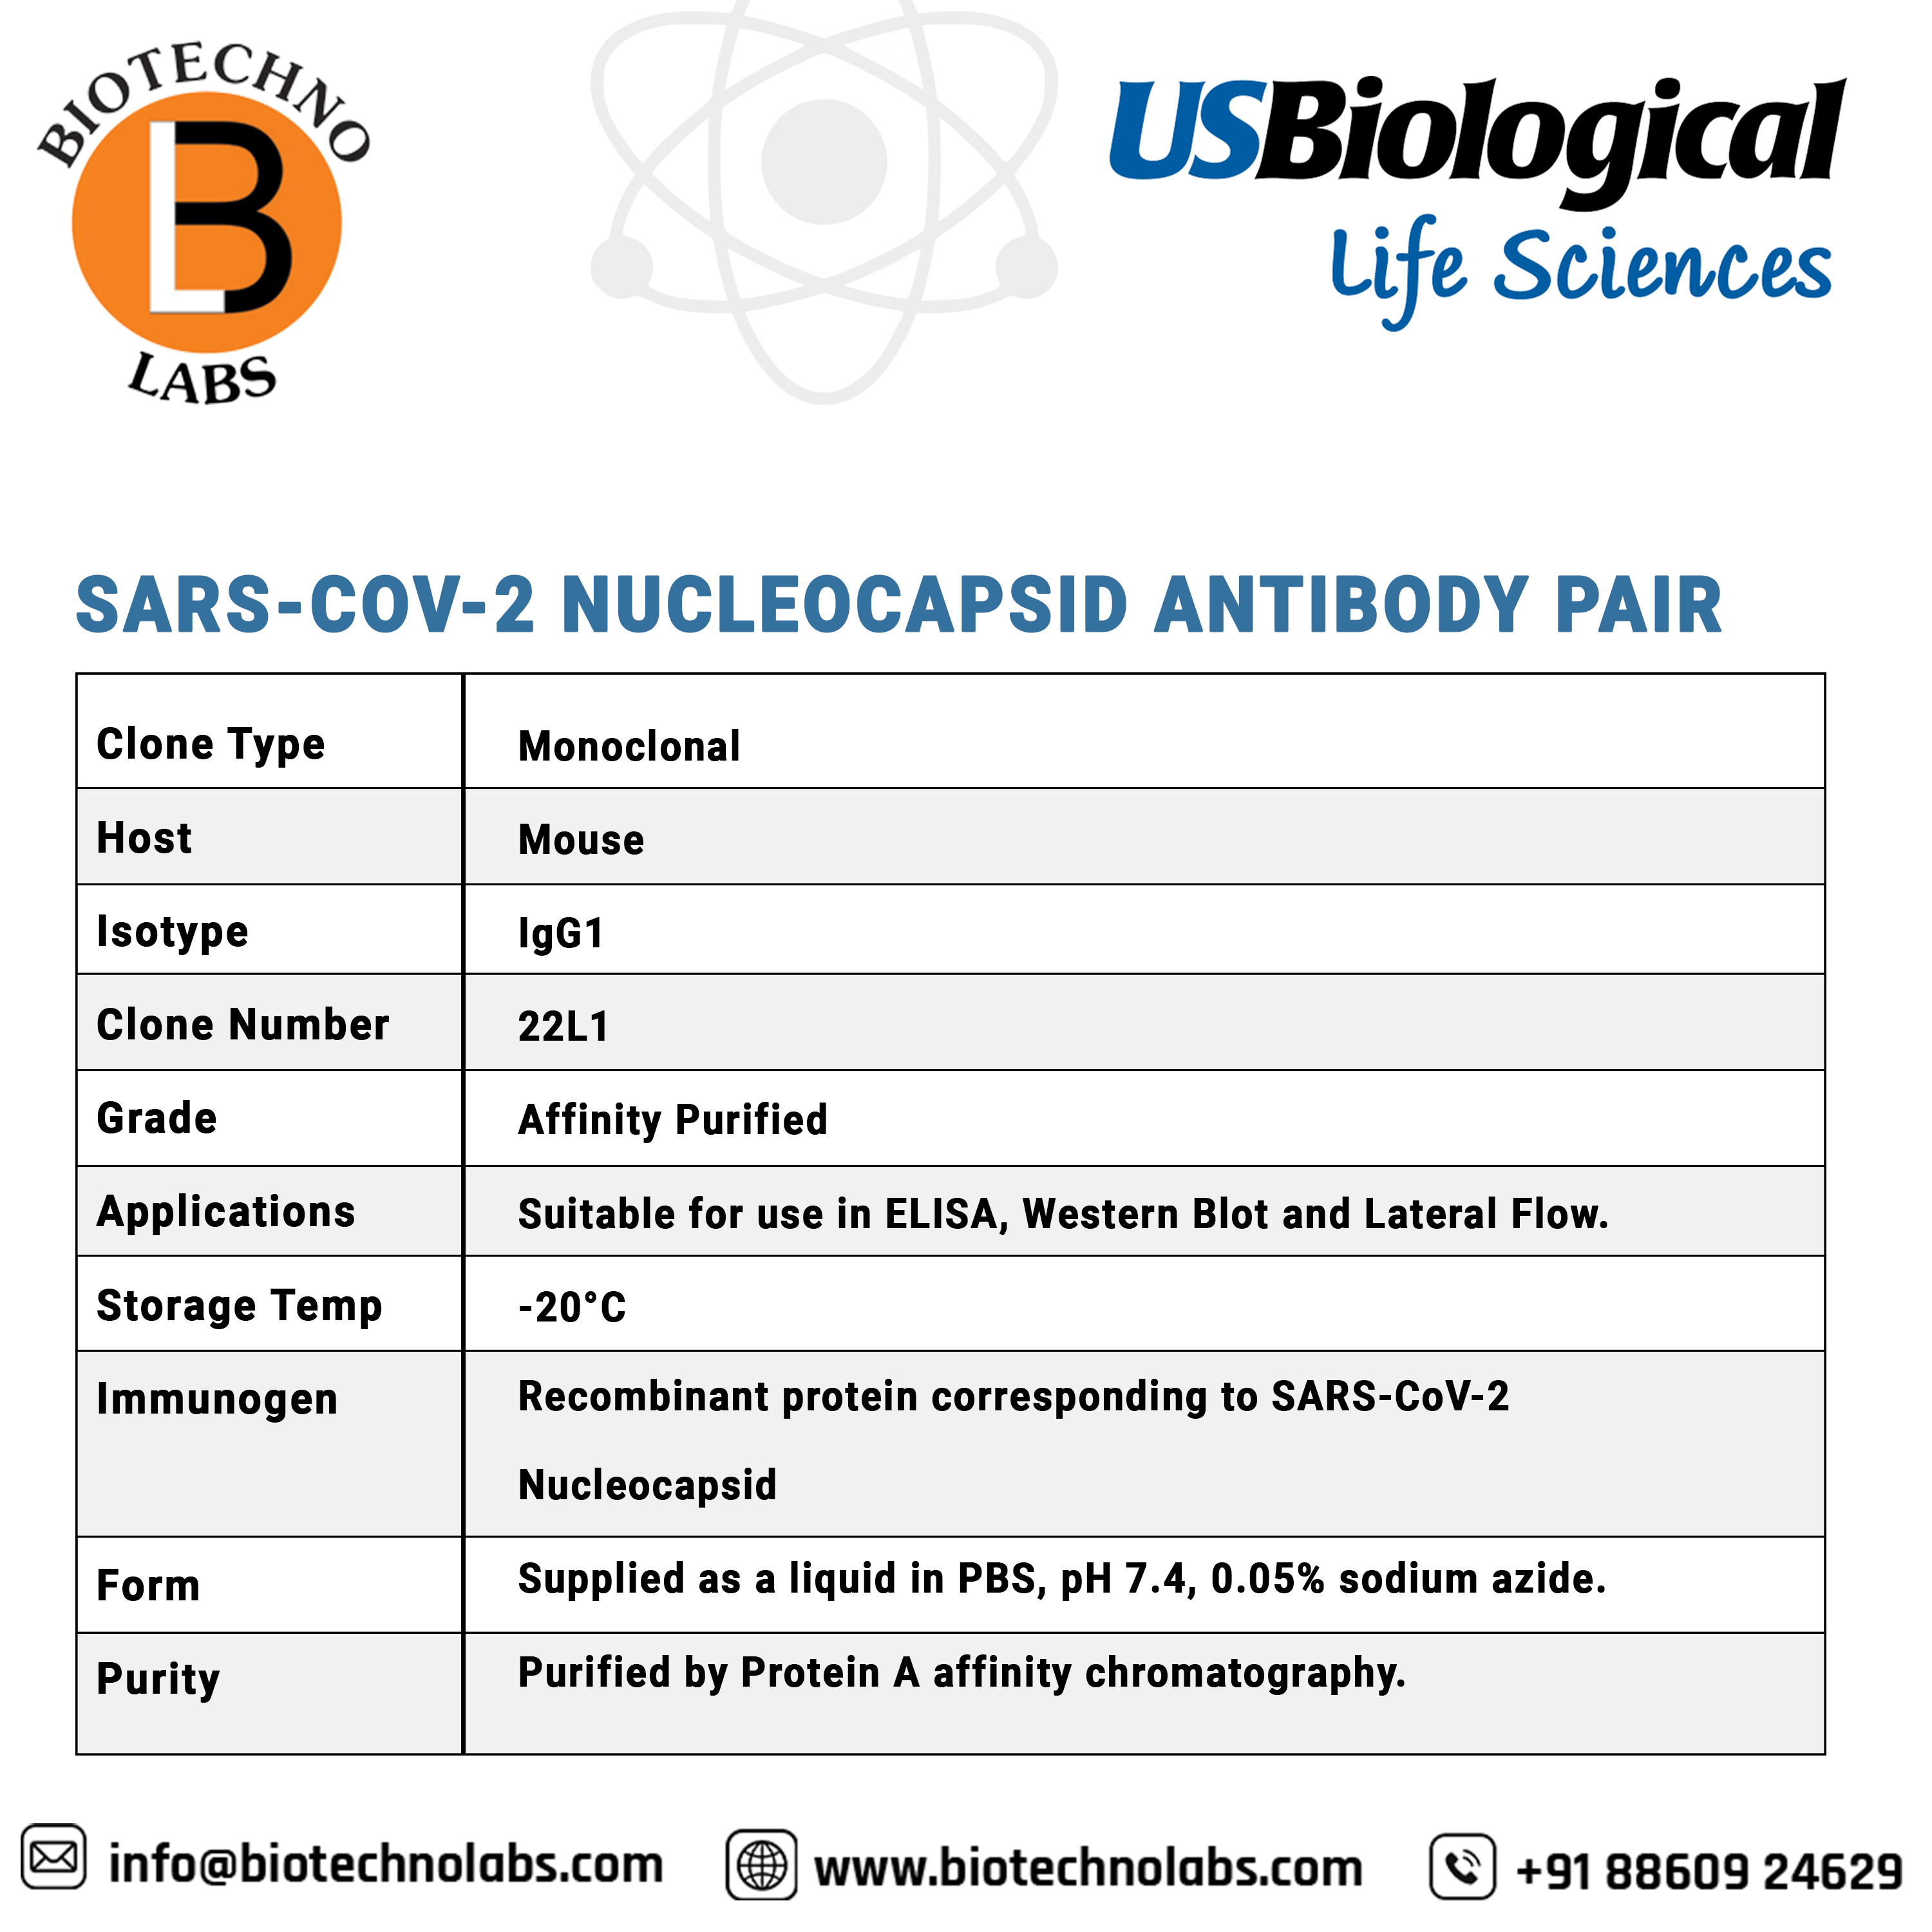 US biologicals has launched SARS-CoV-2 Nucleocapsid Antibody Pair